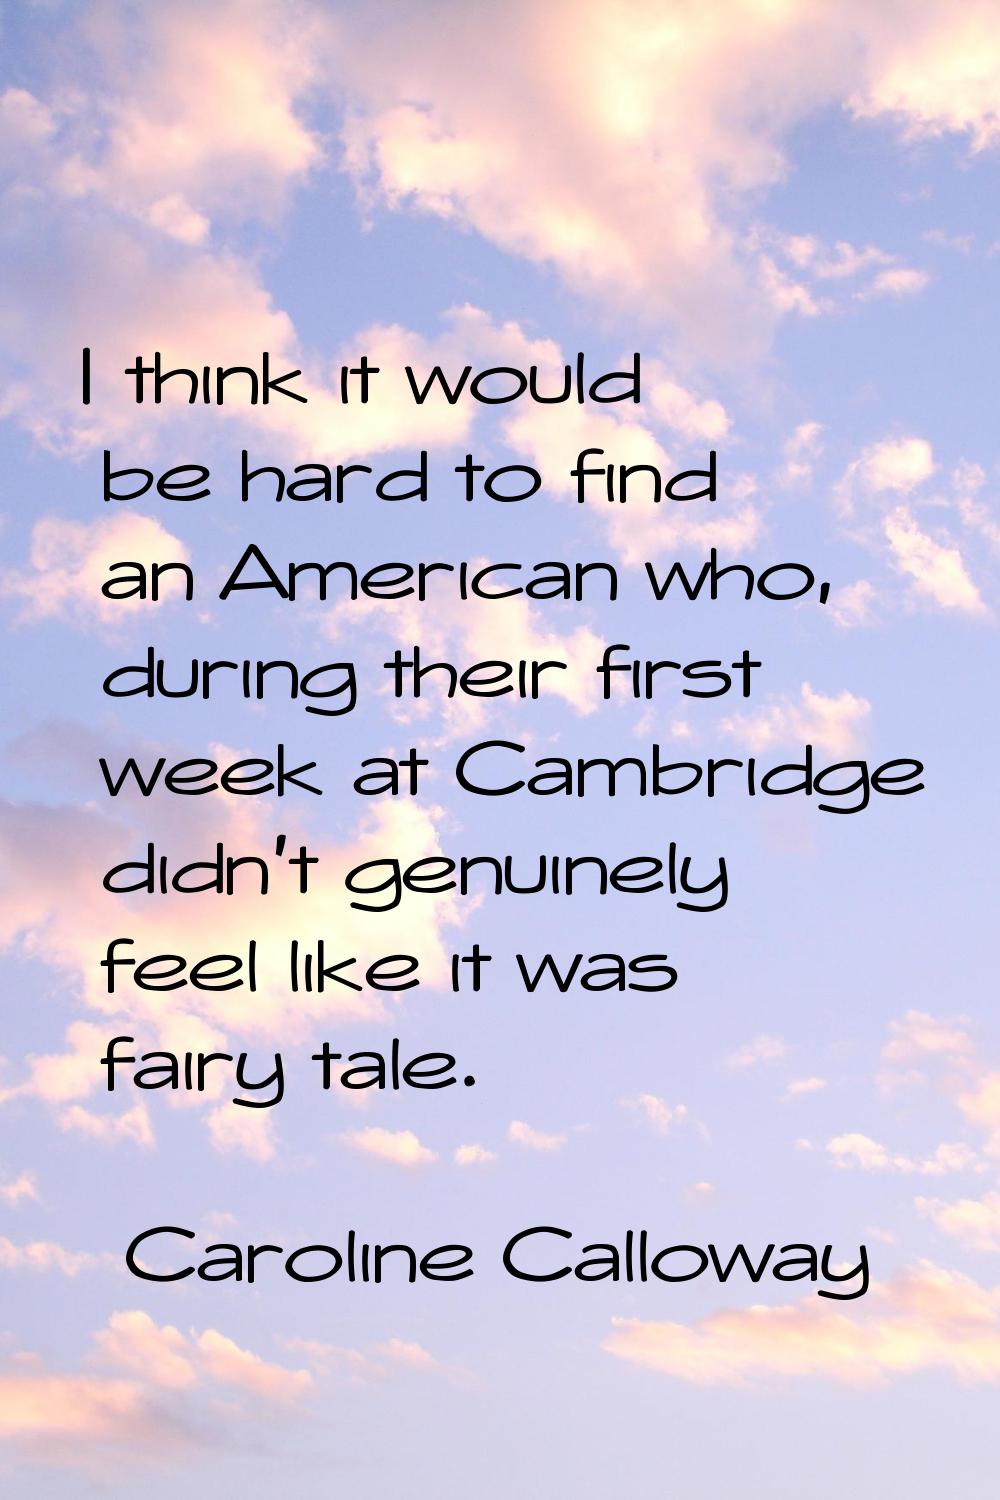 I think it would be hard to find an American who, during their first week at Cambridge didn't genui